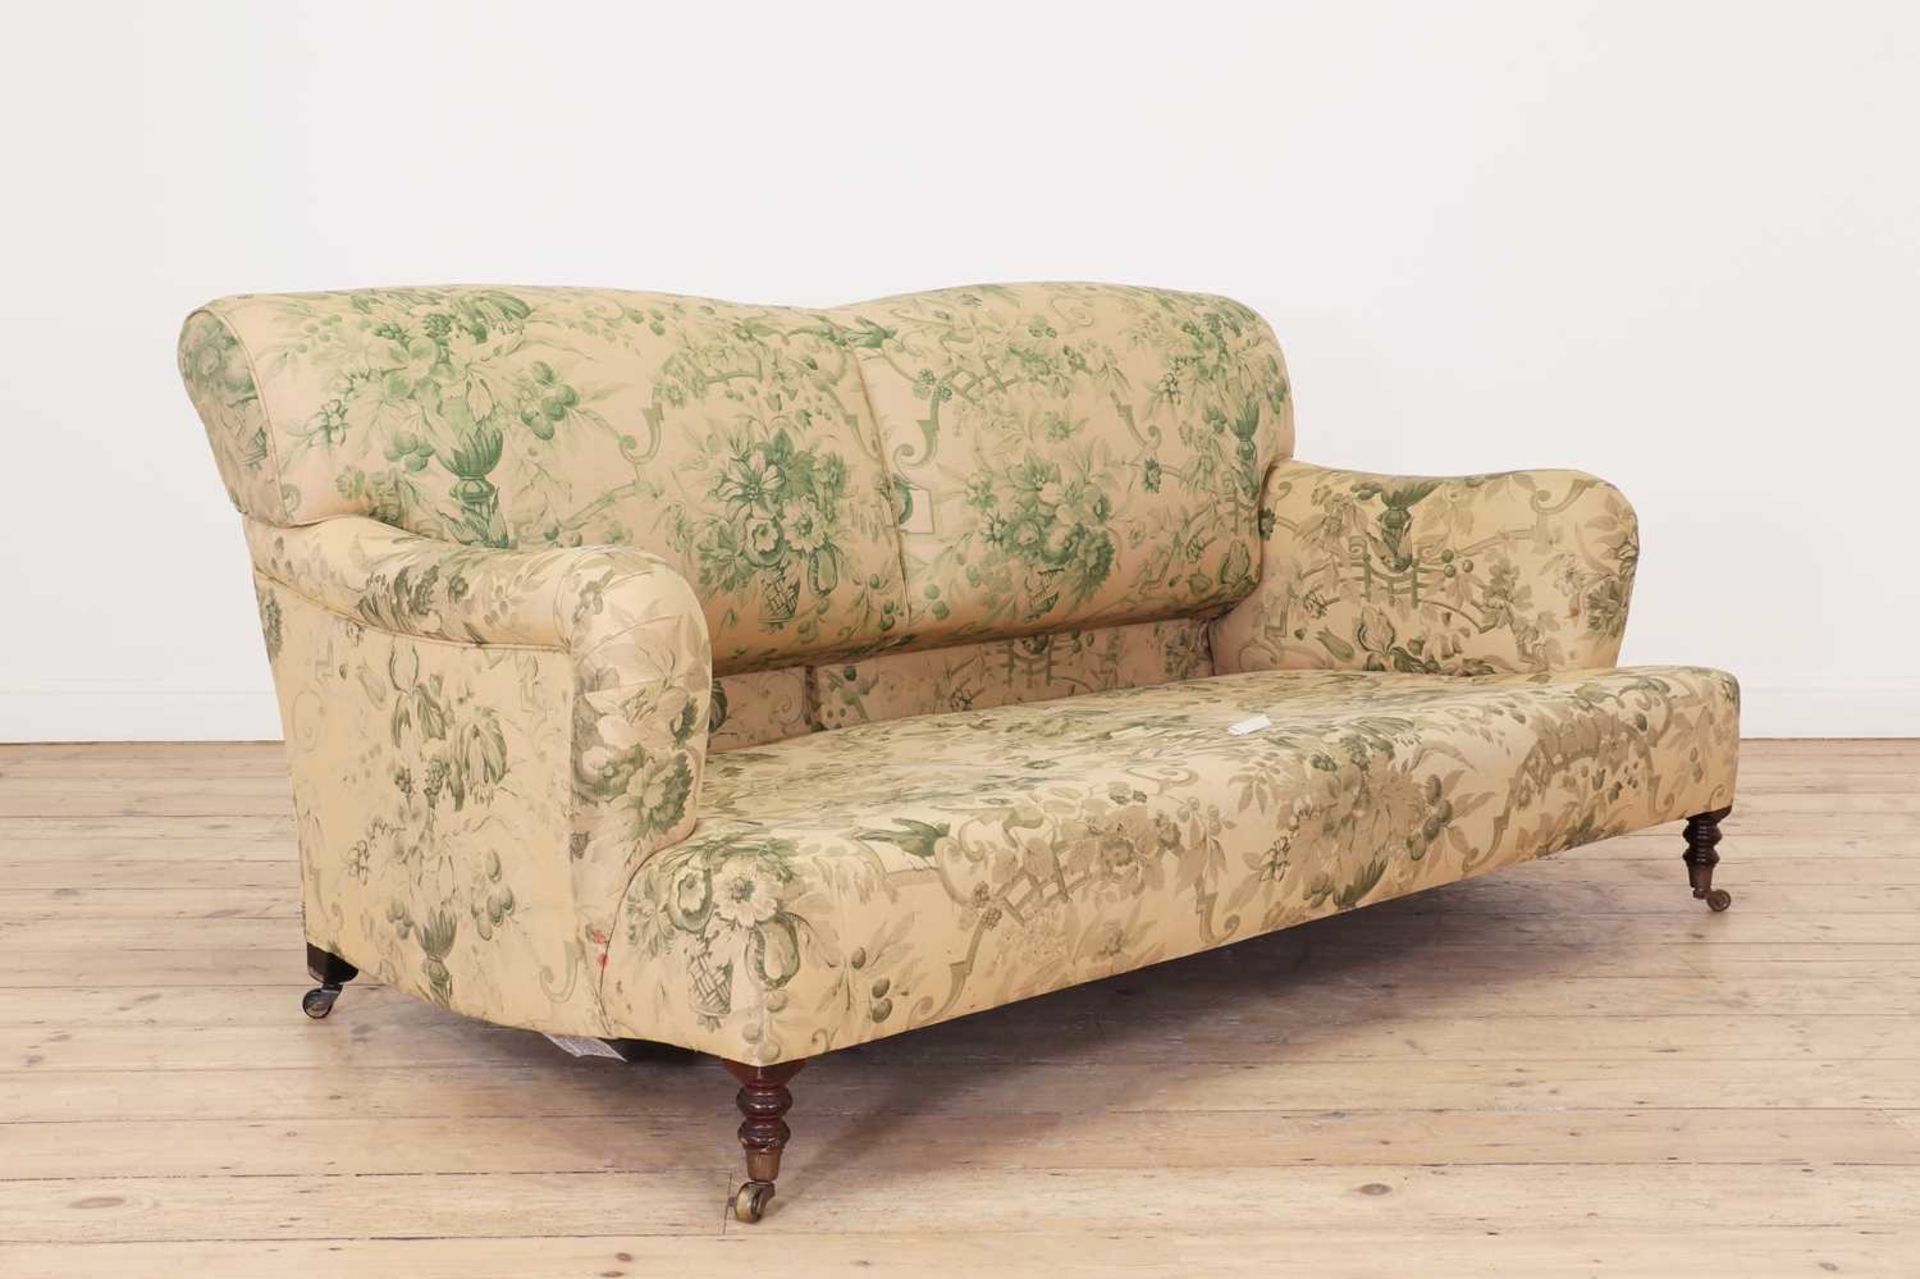 A two-seater sofa by George Smith, - Image 4 of 6